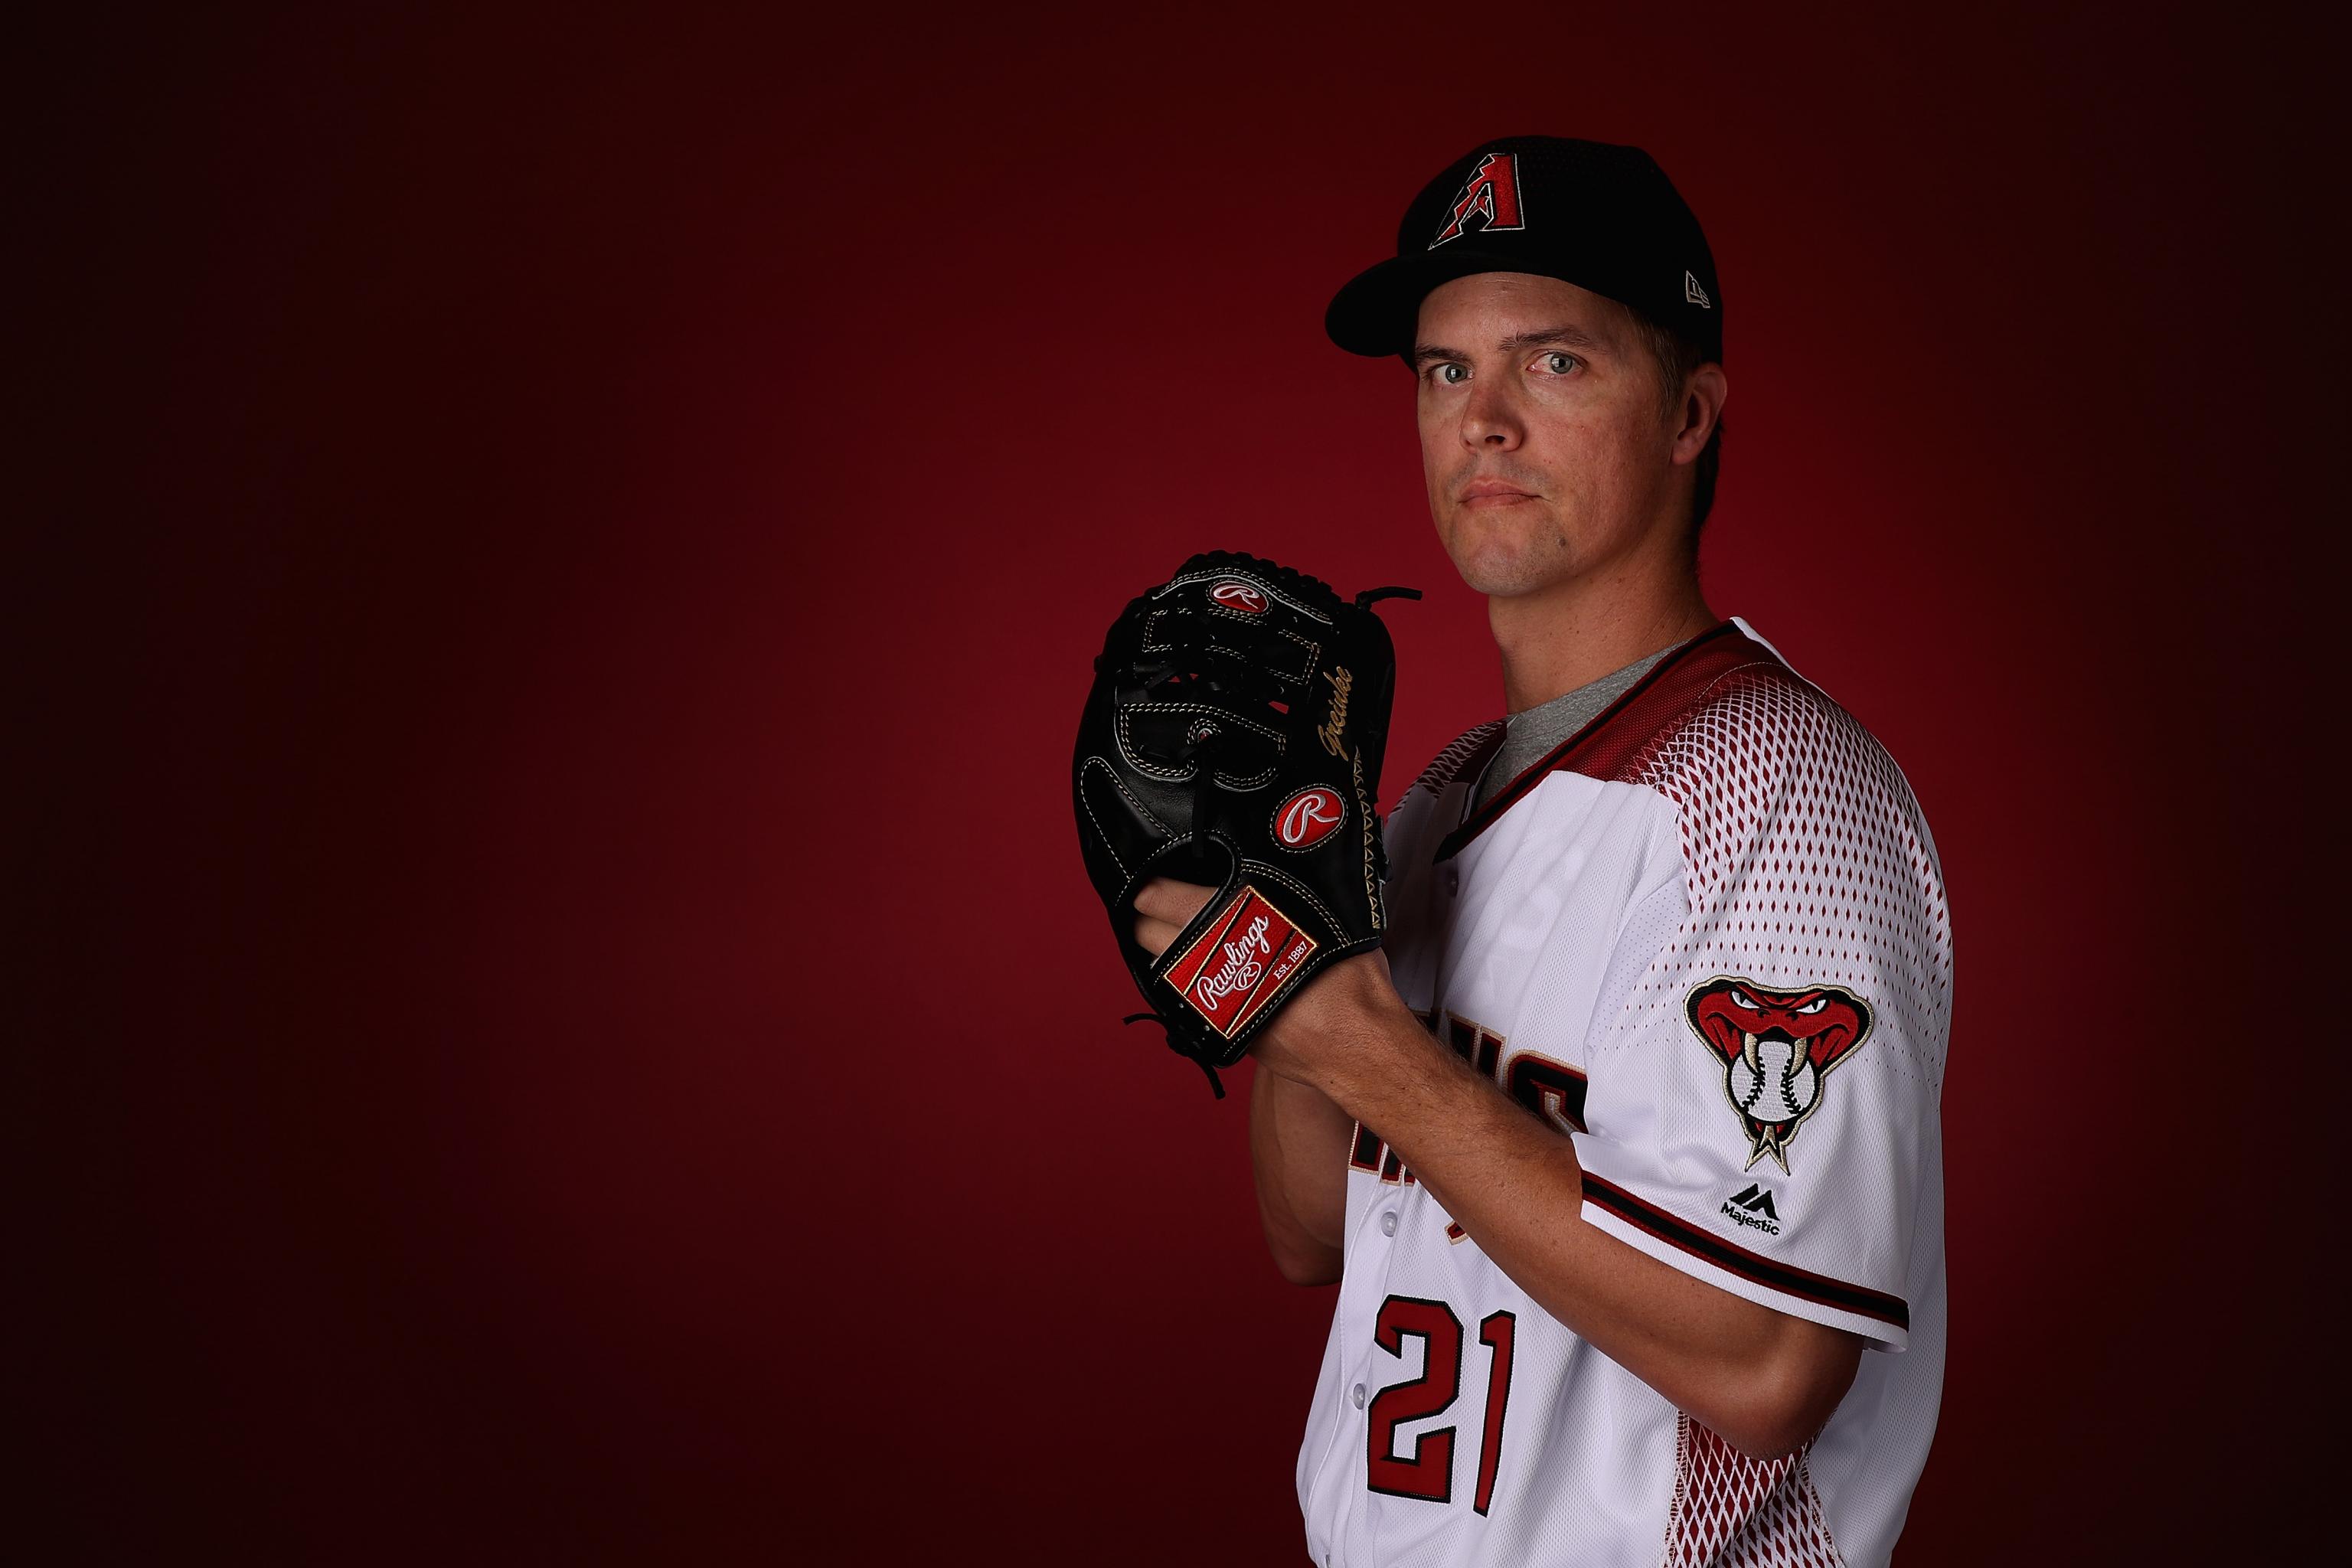 Zack Greinke Closes in on 3,000 Career Strikeouts in MLB - BVM Sports